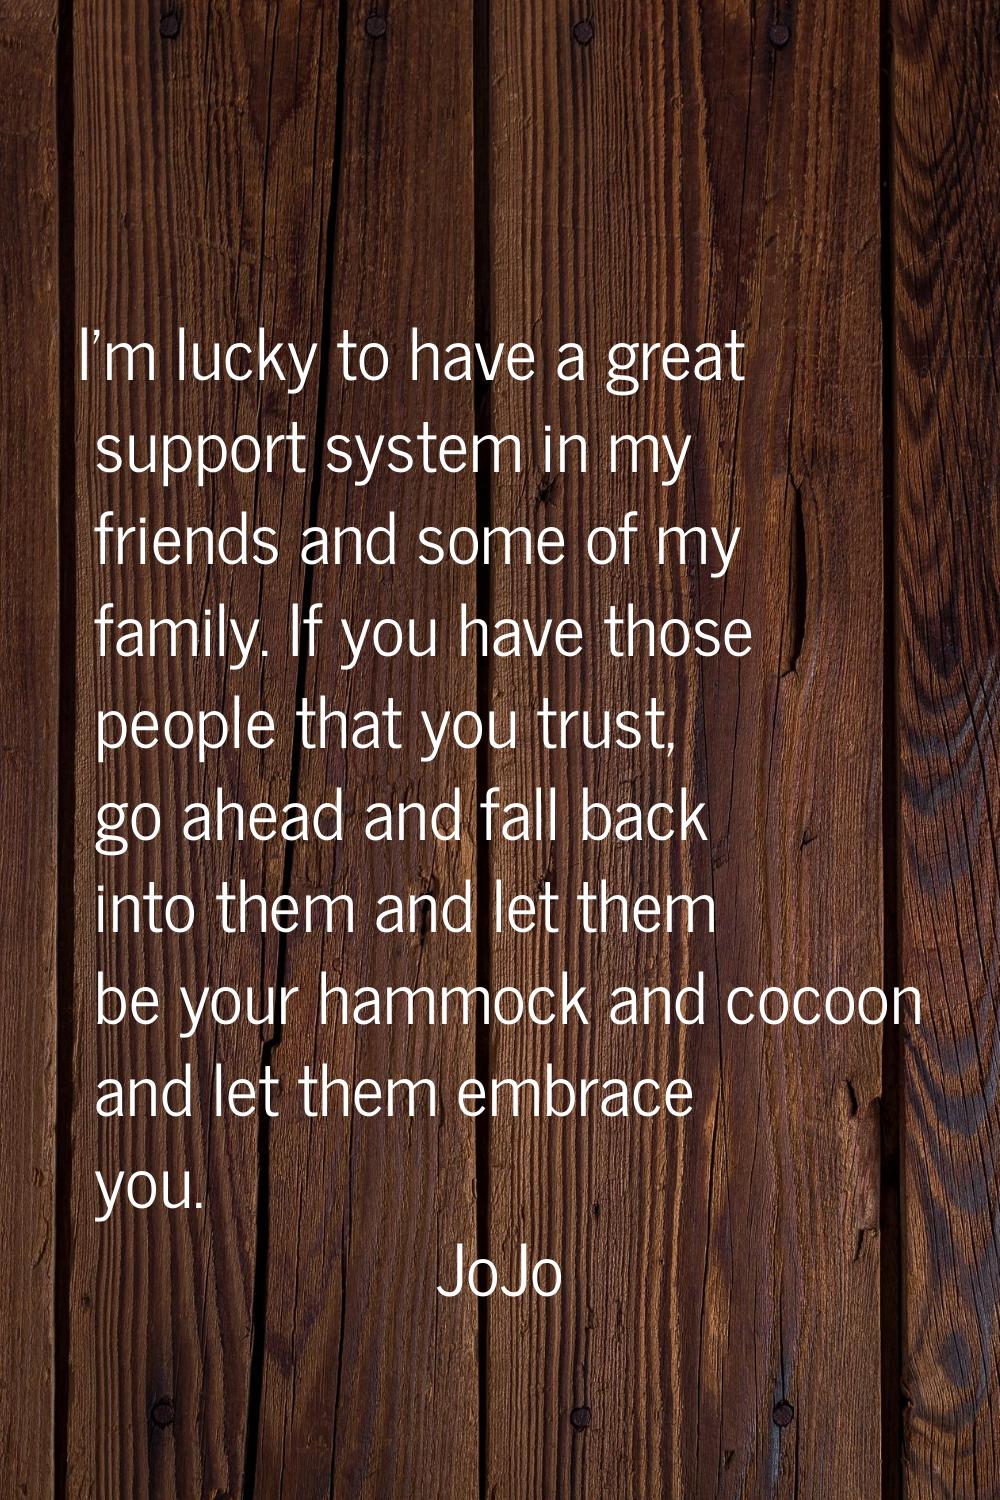 I'm lucky to have a great support system in my friends and some of my family. If you have those peo